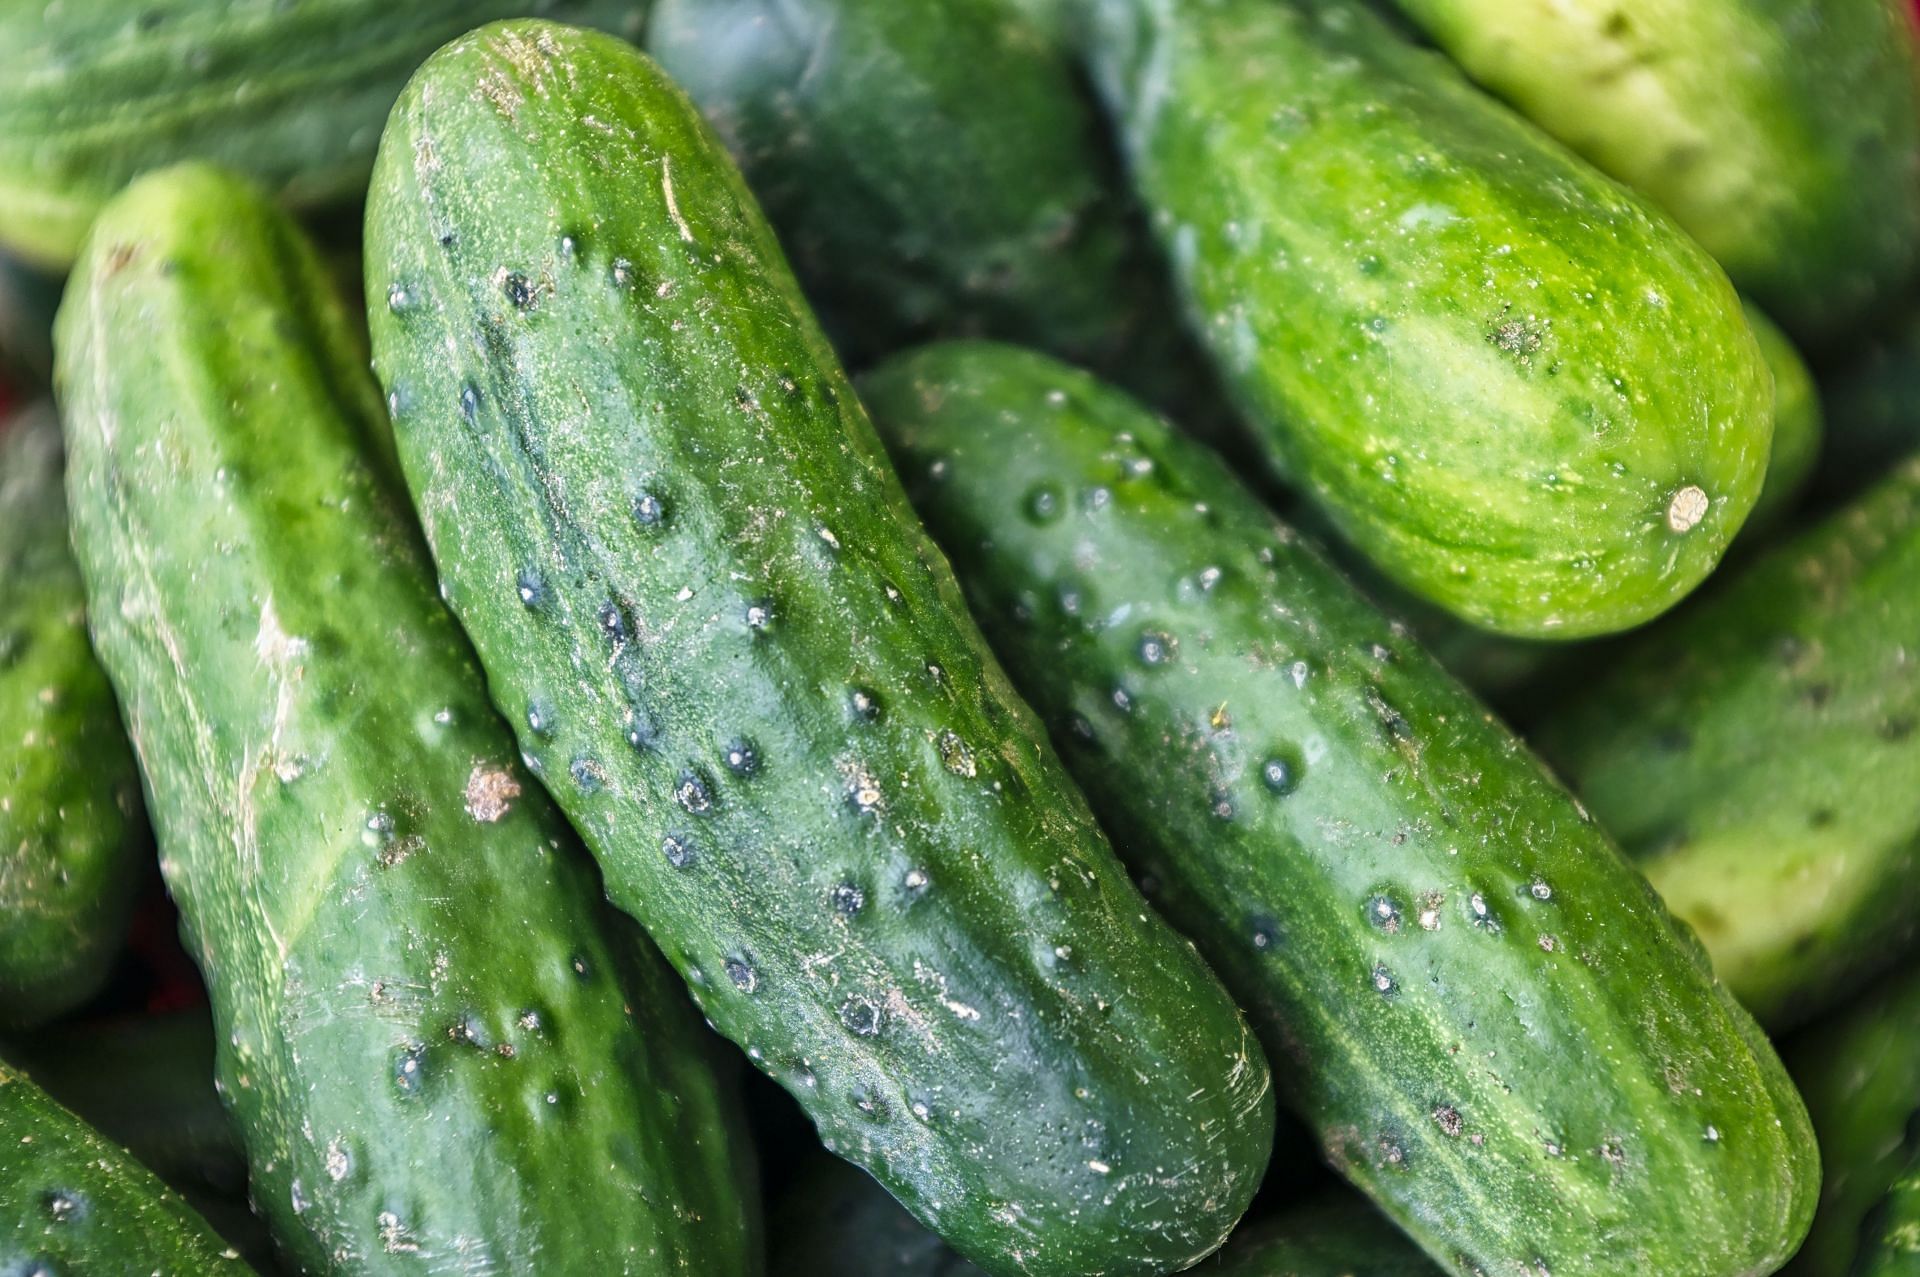 Cucumbers can keep you hydrated (Image via Unsplash/Eric Prouzet)